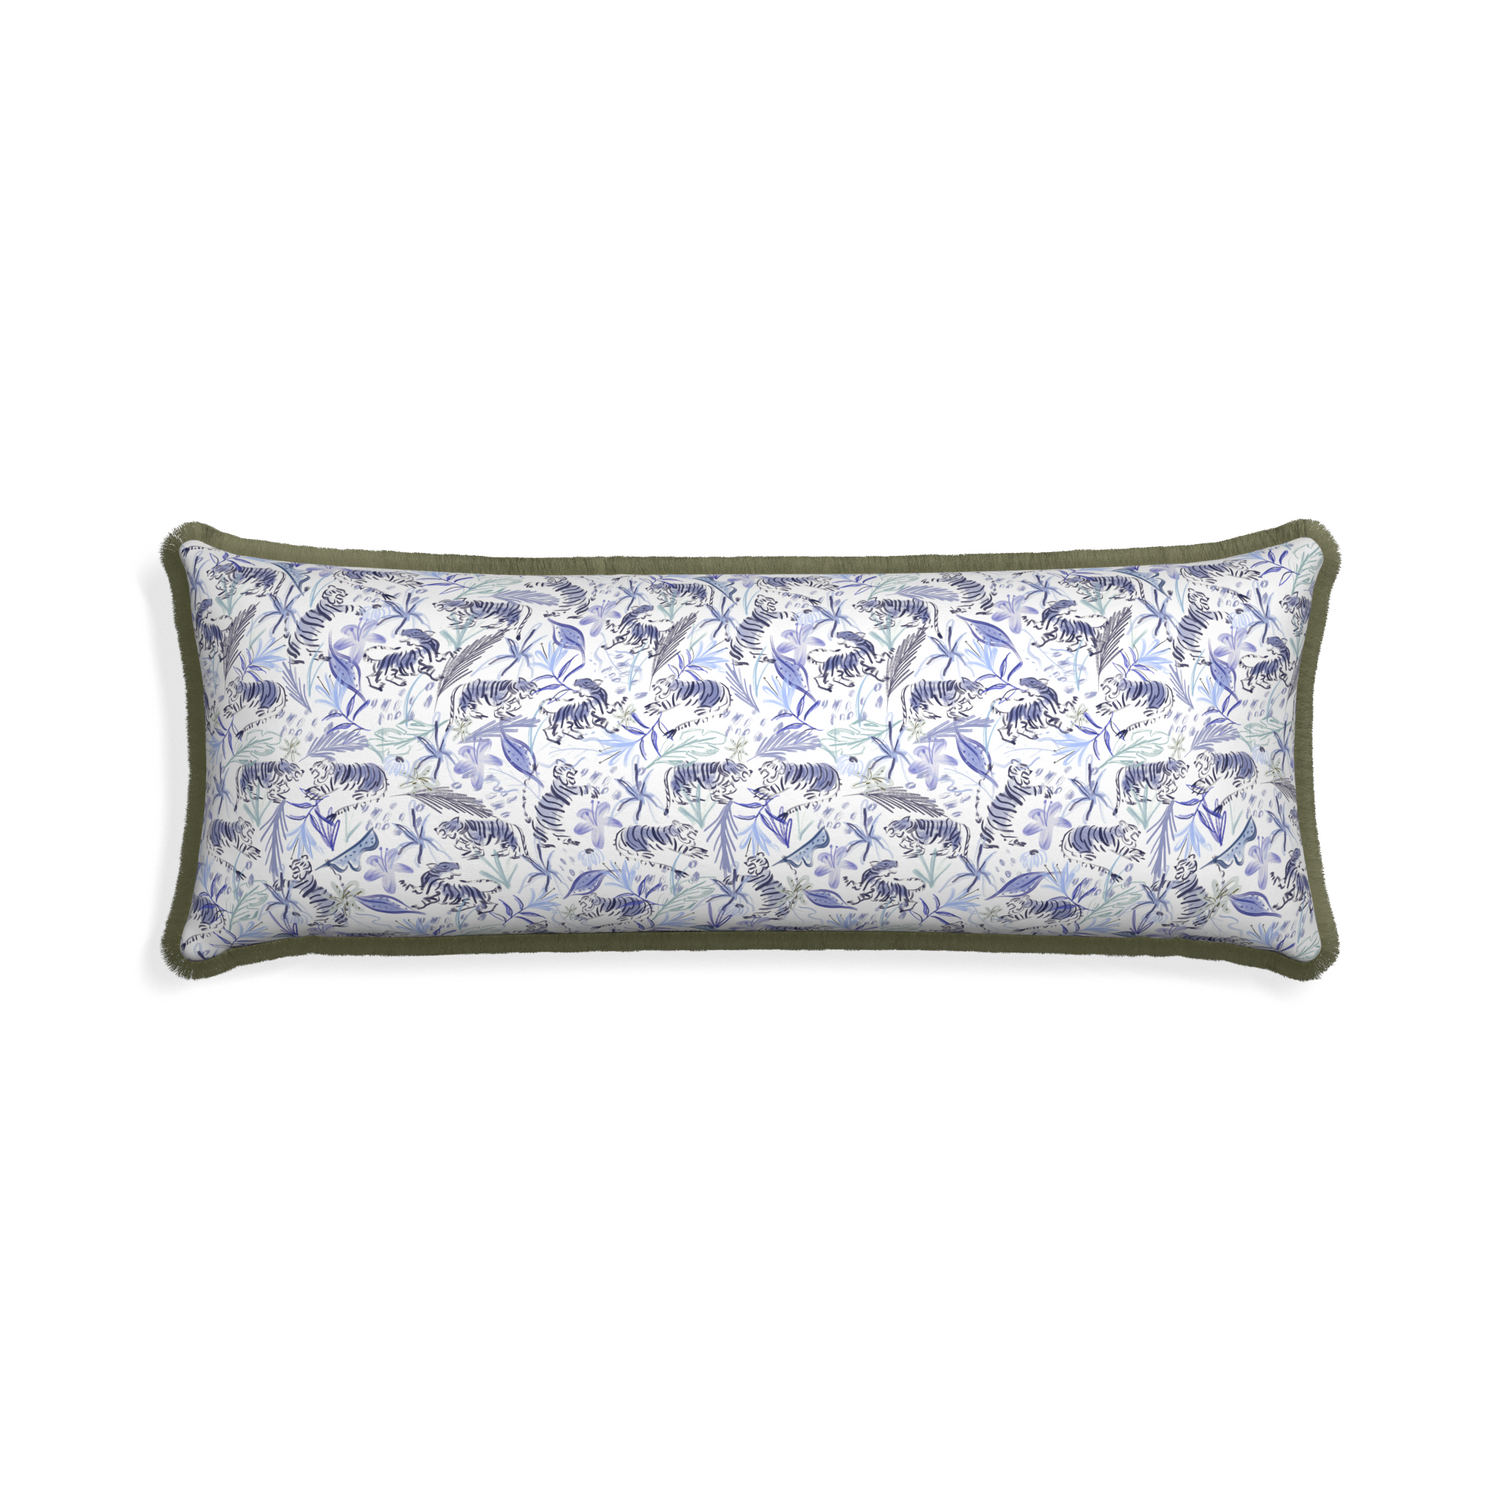 Xl-lumbar frida blue custom blue with intricate tiger designpillow with sage fringe on white background